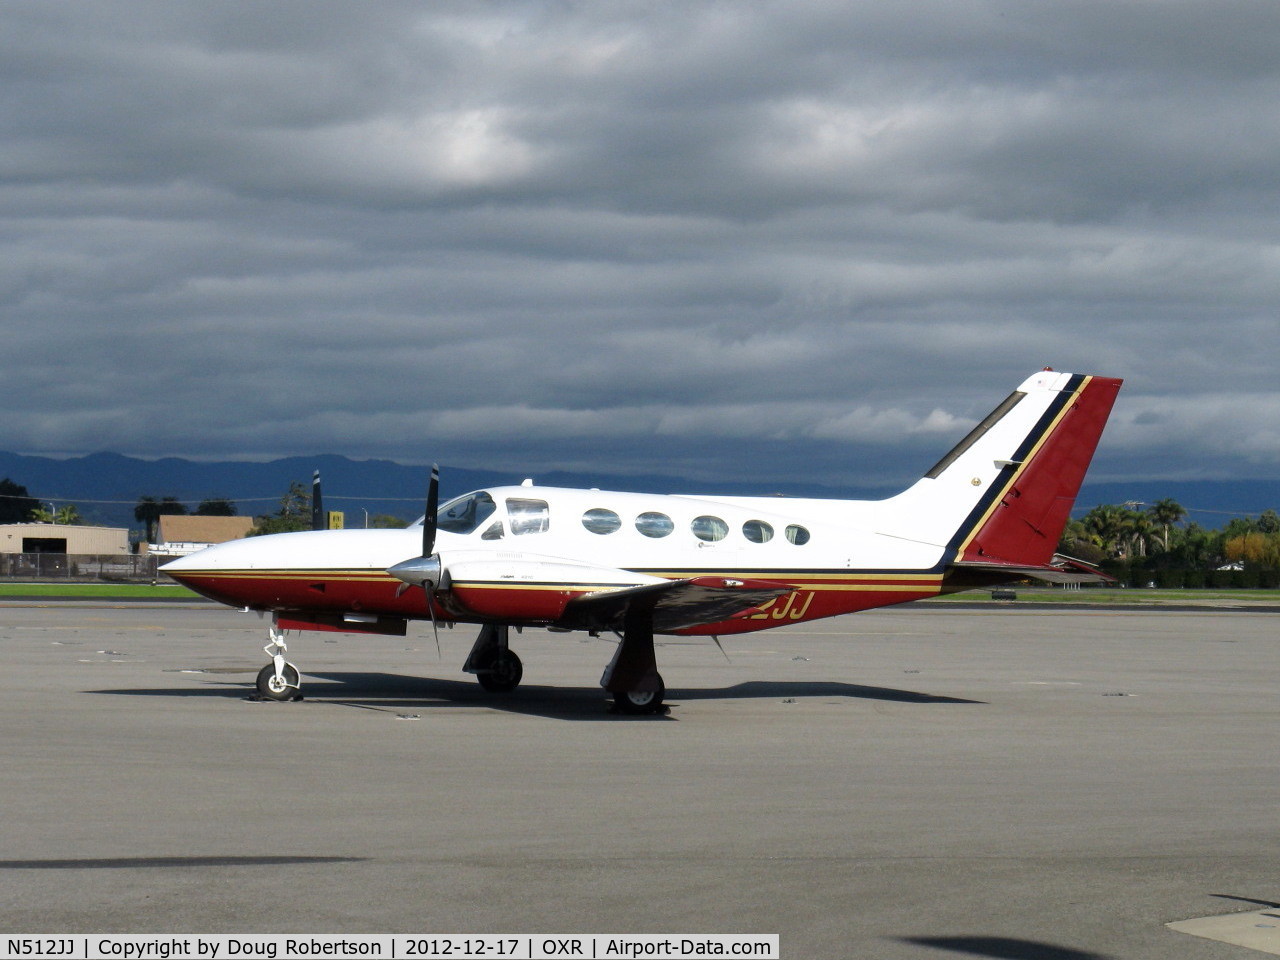 N512JJ, 1984 Cessna 421C Golden Eagle C/N 421C1410, 1984 Cessna 421C GOLDEN EAGLE, two Continental GTSIO-520-L 347 Hp each geared, turbocharged & fuel-injected, pressurized, bonded wet wing, trailing-link landing gear.